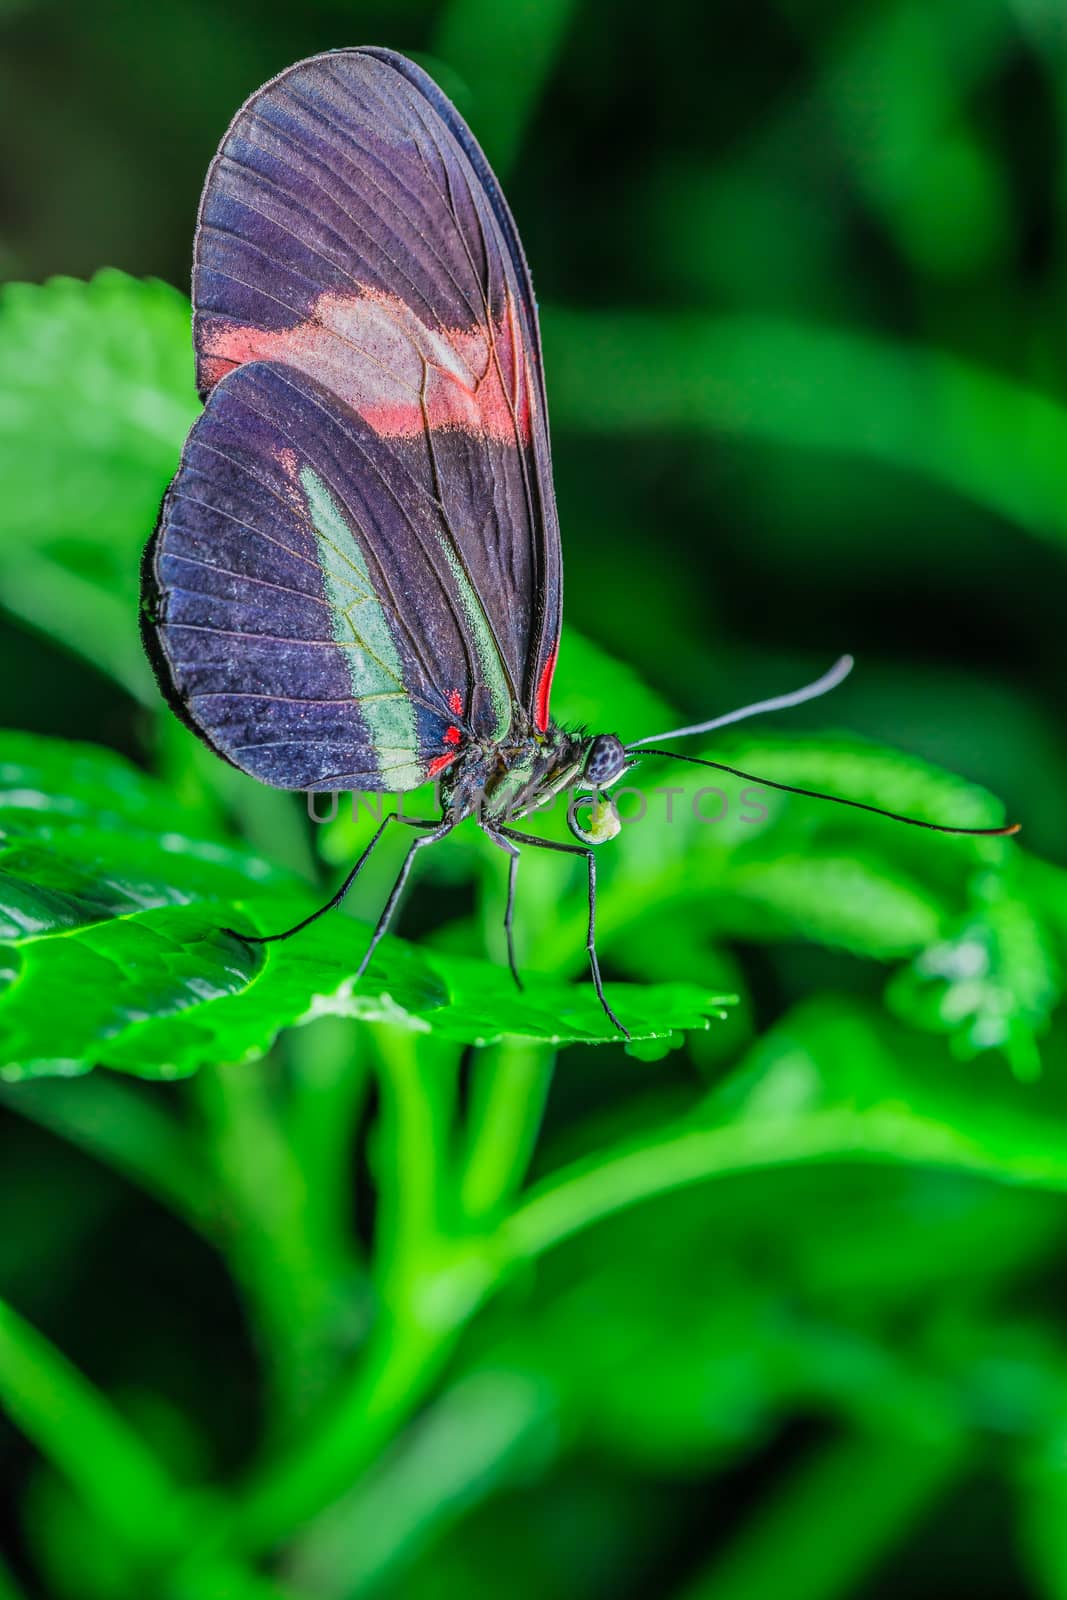 A beautiful butterfly on an green leaf, in a park, in Toronto, Canada.